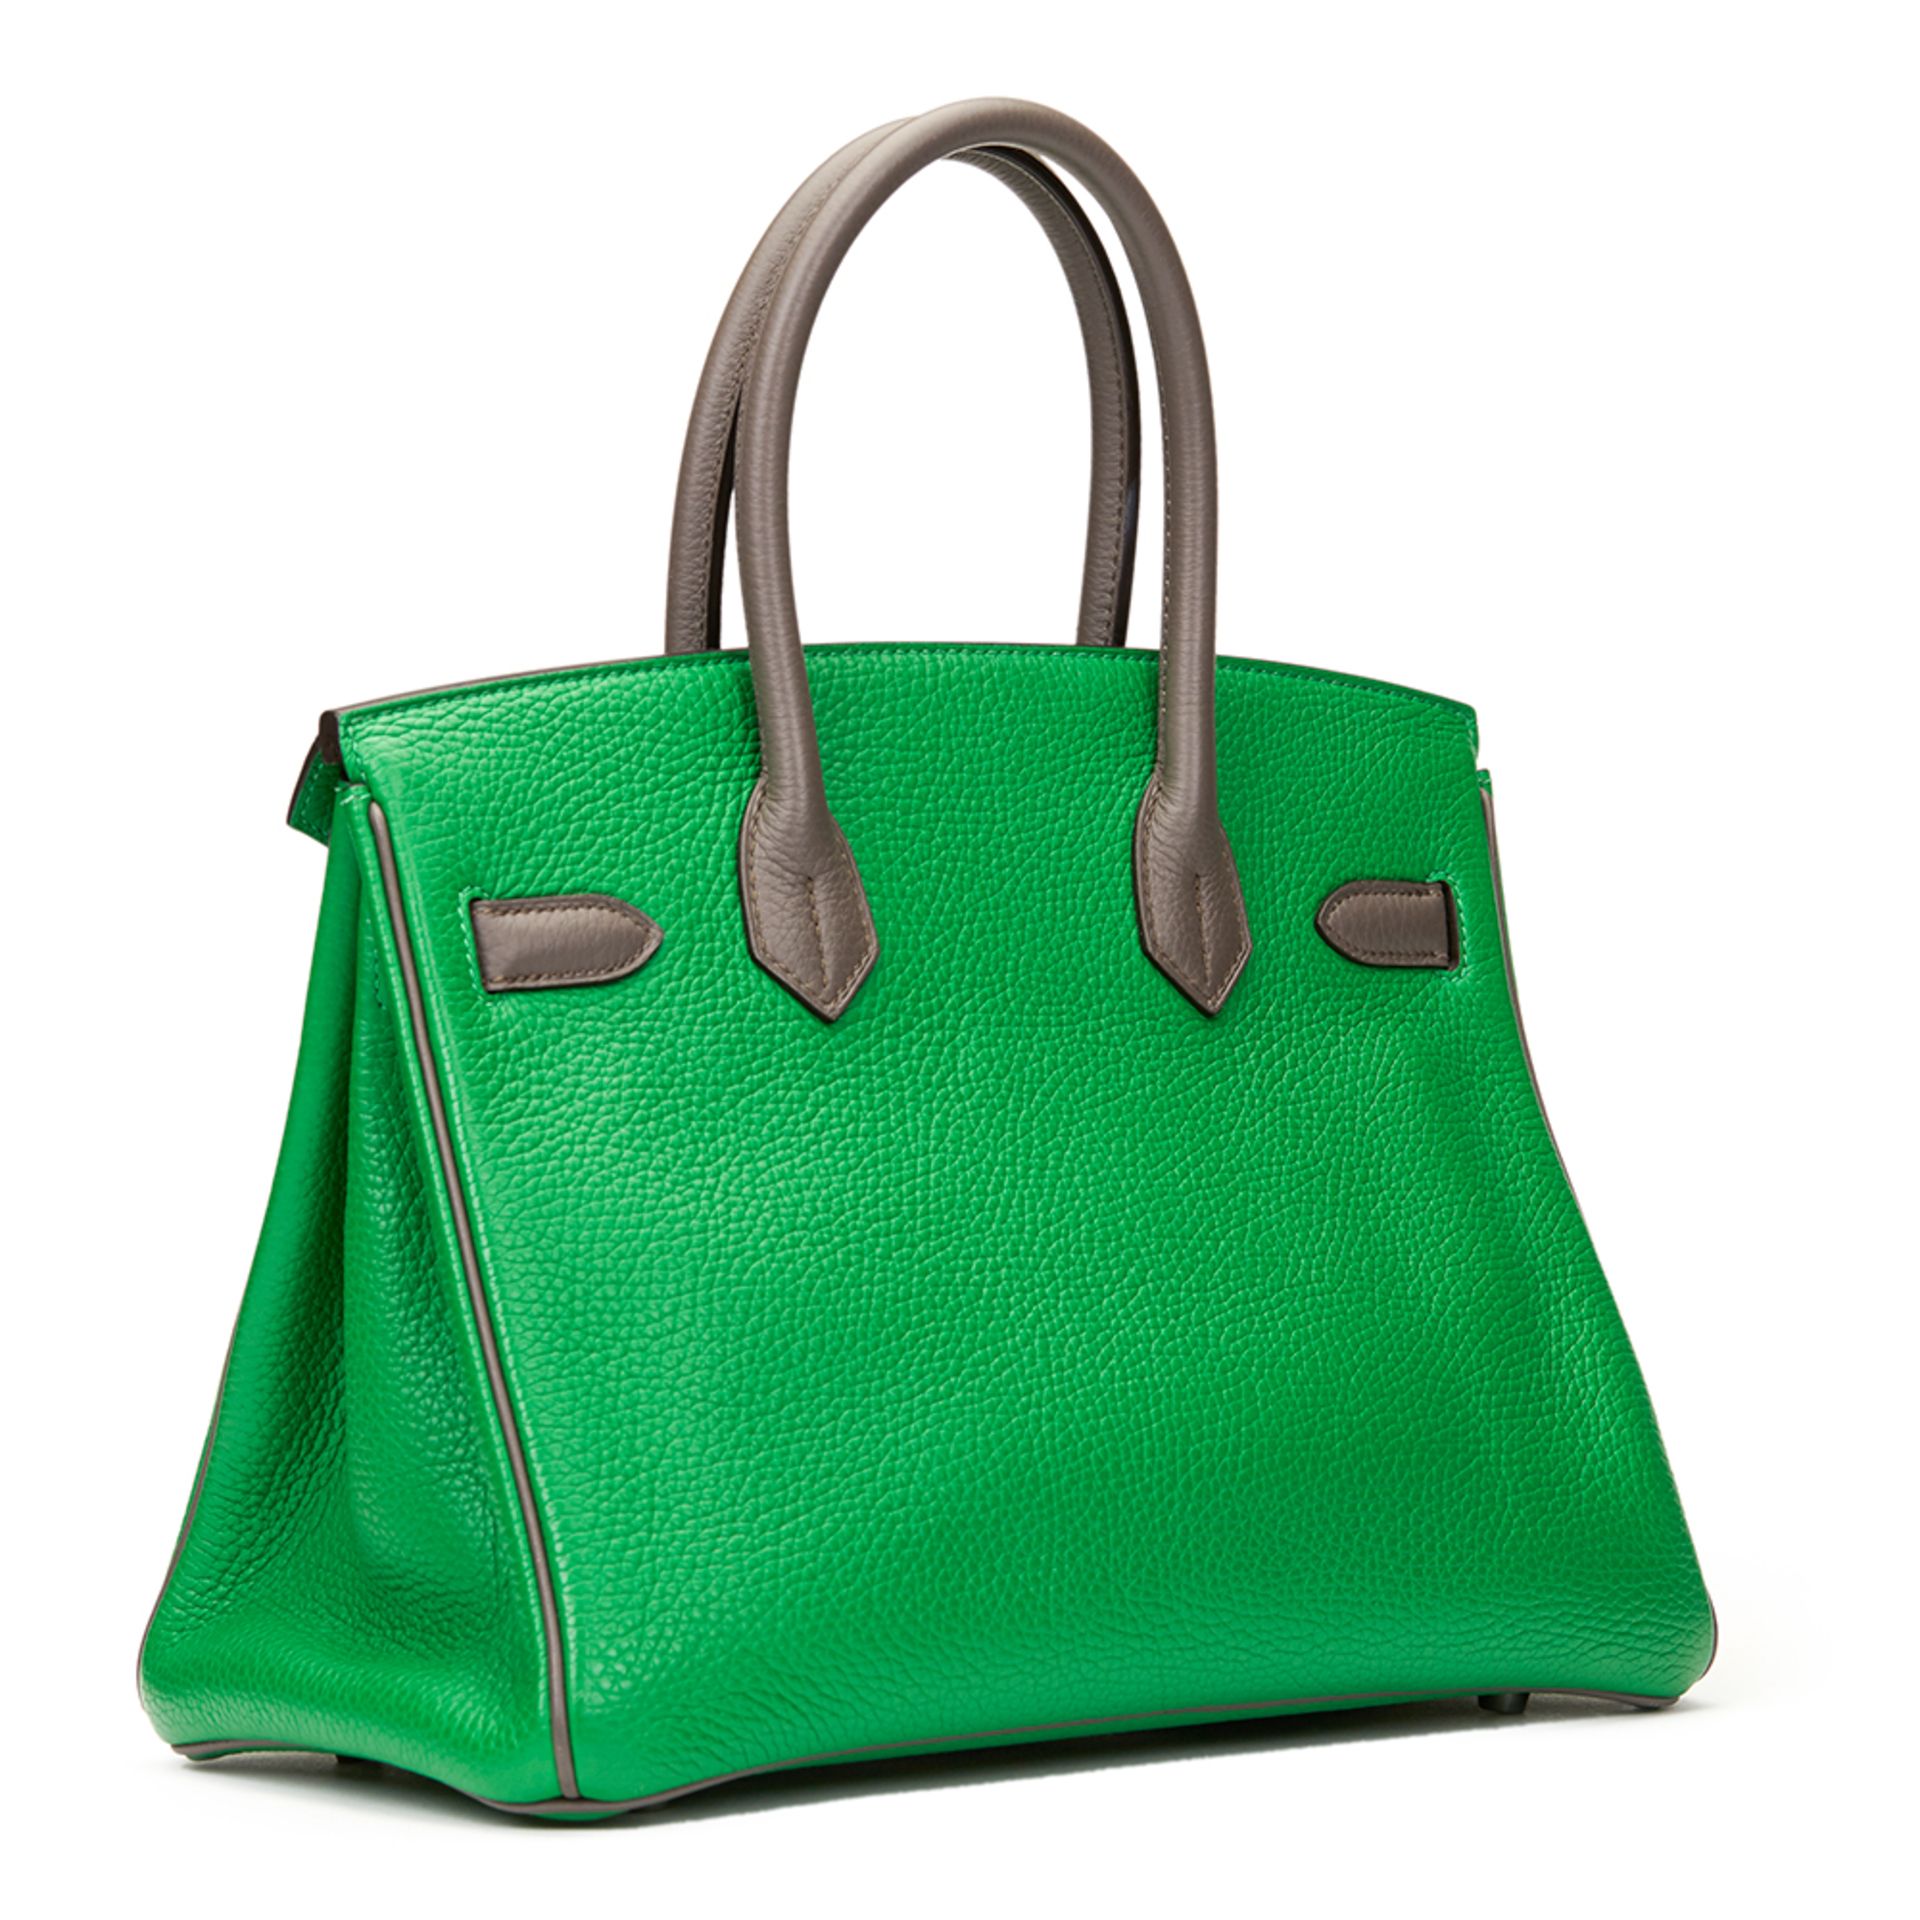 Bambou & Etain Togo Leather Special Order Birkin 30cm - Image 6 of 10